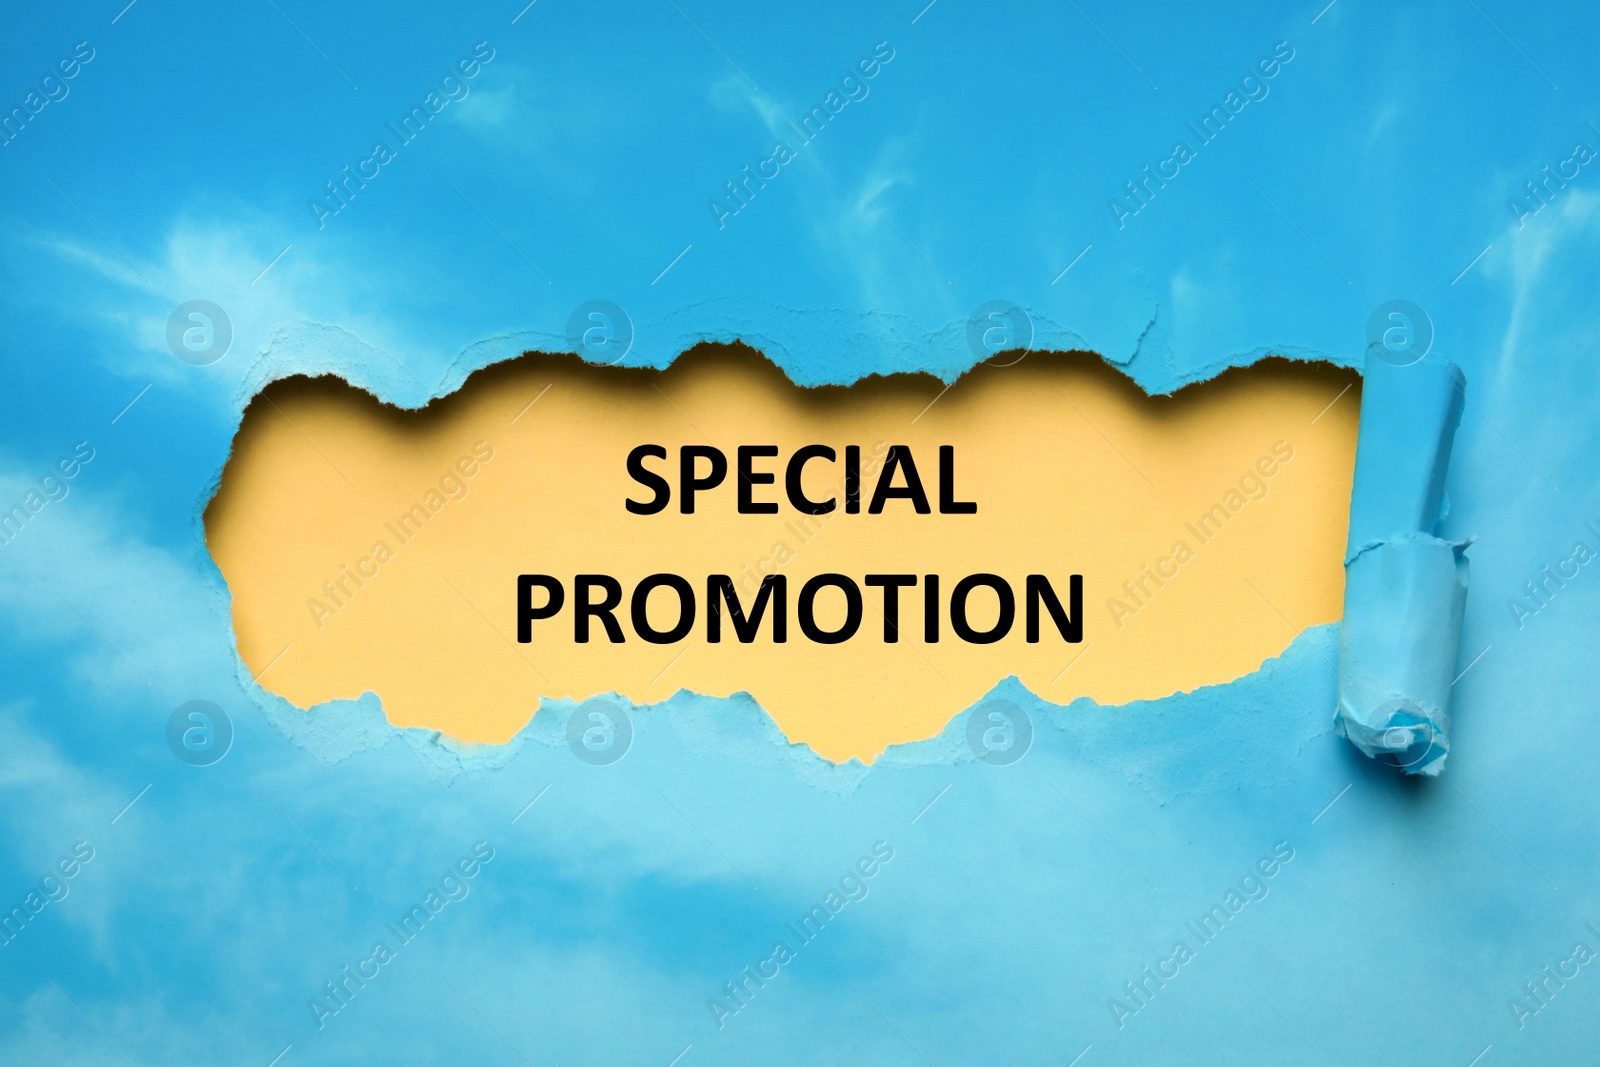 Image of Phrase Special Promotion written on yellow background, view through hole in light blue paper